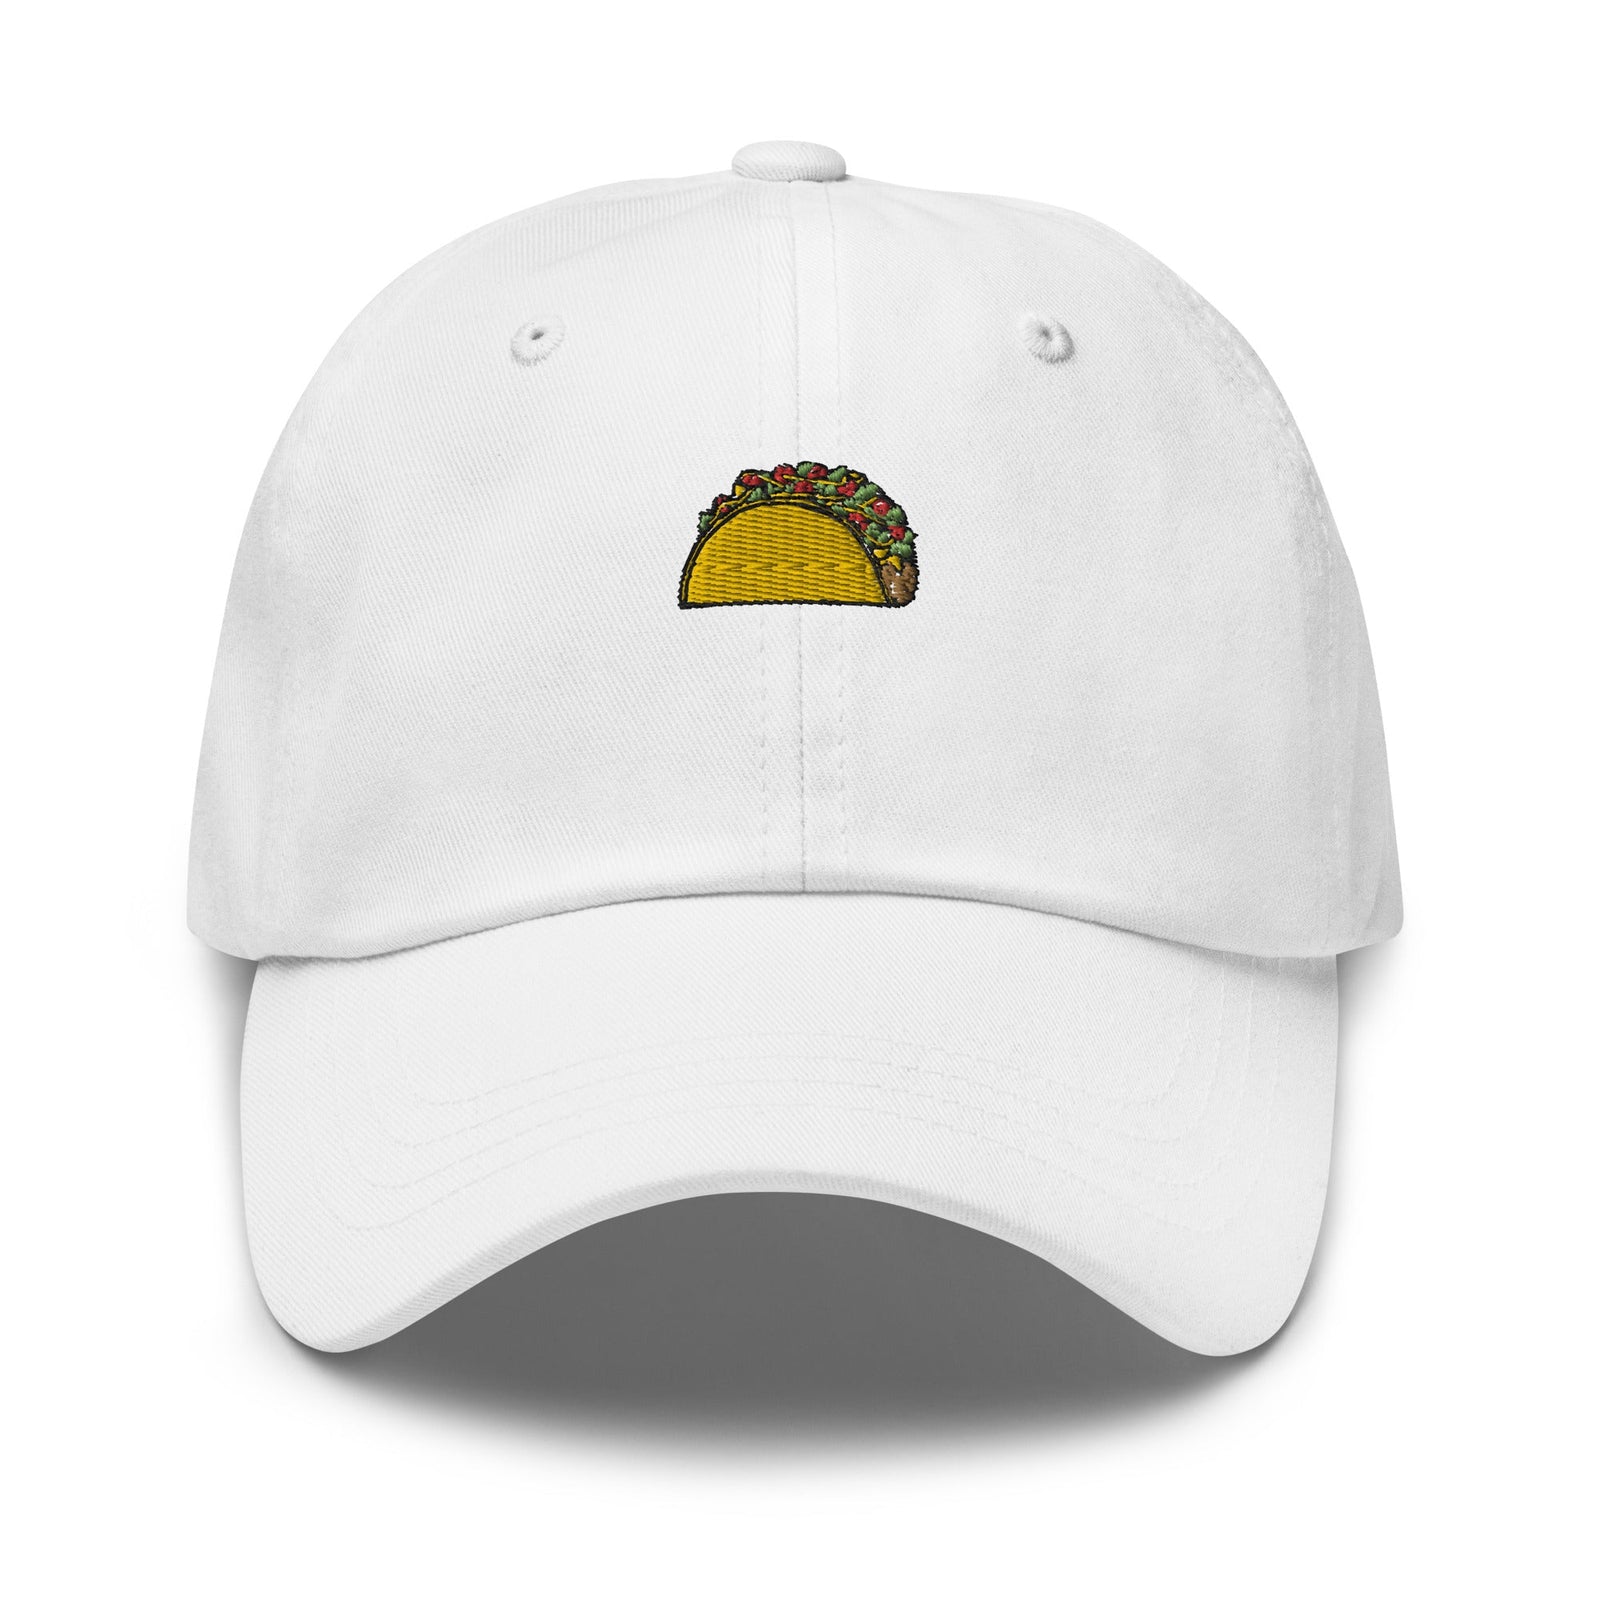 //cdn.shopify.com/s/files/1/0274/2488/2766/products/taco-dad-hat-575369_5000x.jpg?v=1652336010 5000w,
    //cdn.shopify.com/s/files/1/0274/2488/2766/products/taco-dad-hat-575369_4500x.jpg?v=1652336010 4500w,
    //cdn.shopify.com/s/files/1/0274/2488/2766/products/taco-dad-hat-575369_4000x.jpg?v=1652336010 4000w,
    //cdn.shopify.com/s/files/1/0274/2488/2766/products/taco-dad-hat-575369_3500x.jpg?v=1652336010 3500w,
    //cdn.shopify.com/s/files/1/0274/2488/2766/products/taco-dad-hat-575369_3000x.jpg?v=1652336010 3000w,
    //cdn.shopify.com/s/files/1/0274/2488/2766/products/taco-dad-hat-575369_2500x.jpg?v=1652336010 2500w,
    //cdn.shopify.com/s/files/1/0274/2488/2766/products/taco-dad-hat-575369_2000x.jpg?v=1652336010 2000w,
    //cdn.shopify.com/s/files/1/0274/2488/2766/products/taco-dad-hat-575369_1800x.jpg?v=1652336010 1800w,
    //cdn.shopify.com/s/files/1/0274/2488/2766/products/taco-dad-hat-575369_1600x.jpg?v=1652336010 1600w,
    //cdn.shopify.com/s/files/1/0274/2488/2766/products/taco-dad-hat-575369_1400x.jpg?v=1652336010 1400w,
    //cdn.shopify.com/s/files/1/0274/2488/2766/products/taco-dad-hat-575369_1200x.jpg?v=1652336010 1200w,
    //cdn.shopify.com/s/files/1/0274/2488/2766/products/taco-dad-hat-575369_1000x.jpg?v=1652336010 1000w,
    //cdn.shopify.com/s/files/1/0274/2488/2766/products/taco-dad-hat-575369_800x.jpg?v=1652336010 800w,
    //cdn.shopify.com/s/files/1/0274/2488/2766/products/taco-dad-hat-575369_600x.jpg?v=1652336010 600w,
    //cdn.shopify.com/s/files/1/0274/2488/2766/products/taco-dad-hat-575369_400x.jpg?v=1652336010 400w,
    //cdn.shopify.com/s/files/1/0274/2488/2766/products/taco-dad-hat-575369_200x.jpg?v=1652336010 200w